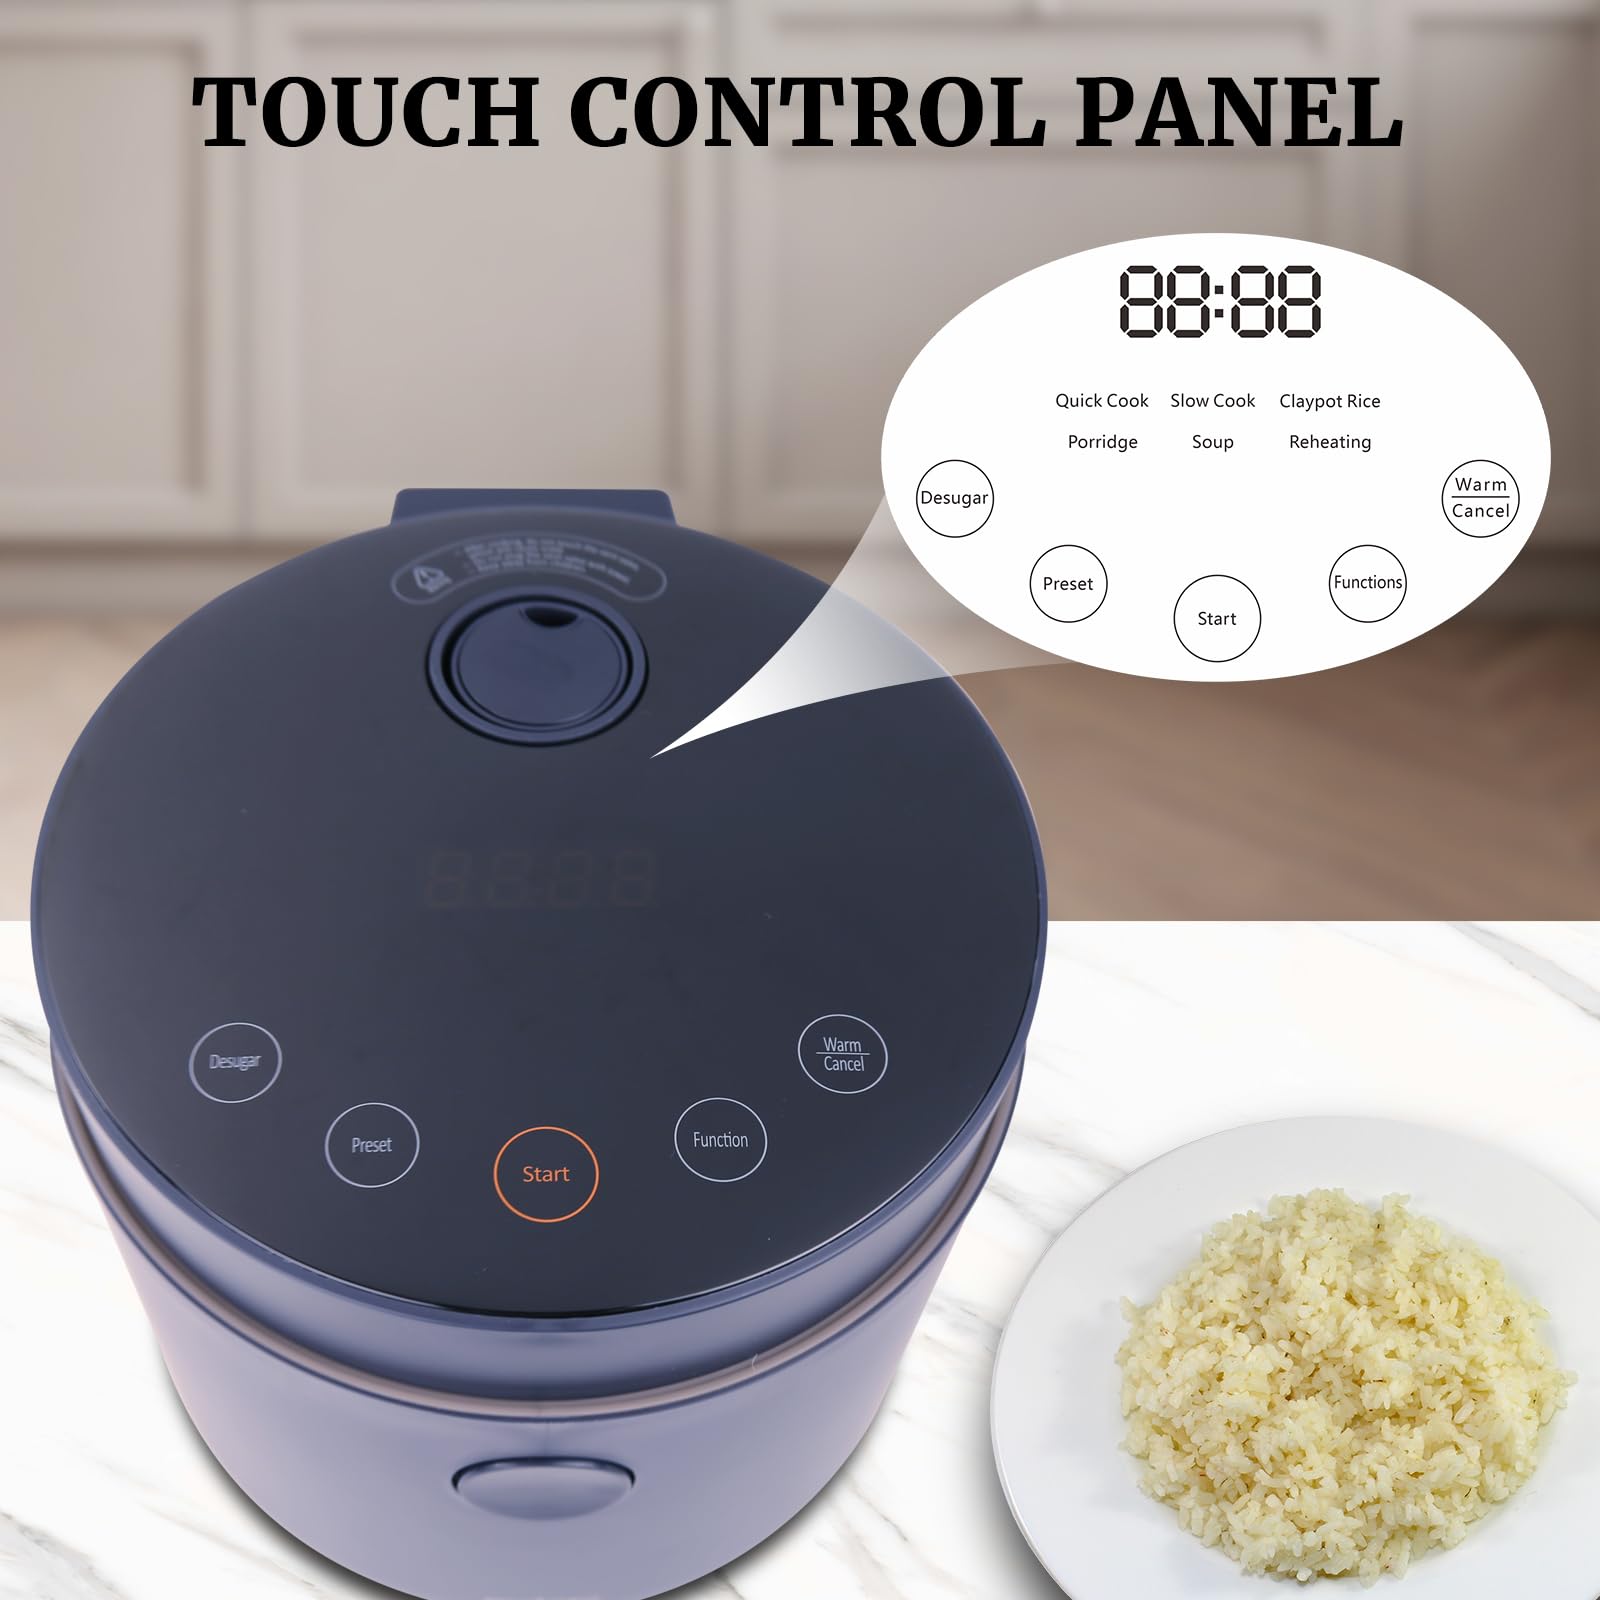 Clivia  Low Carb Rice Cooker, 7 Functions Rice Pot 4 Cups Uncooked Rice with Stainless Steel Steamer MINI Desuger Smart Cooker Non-stick Inner 24H Delay Timer